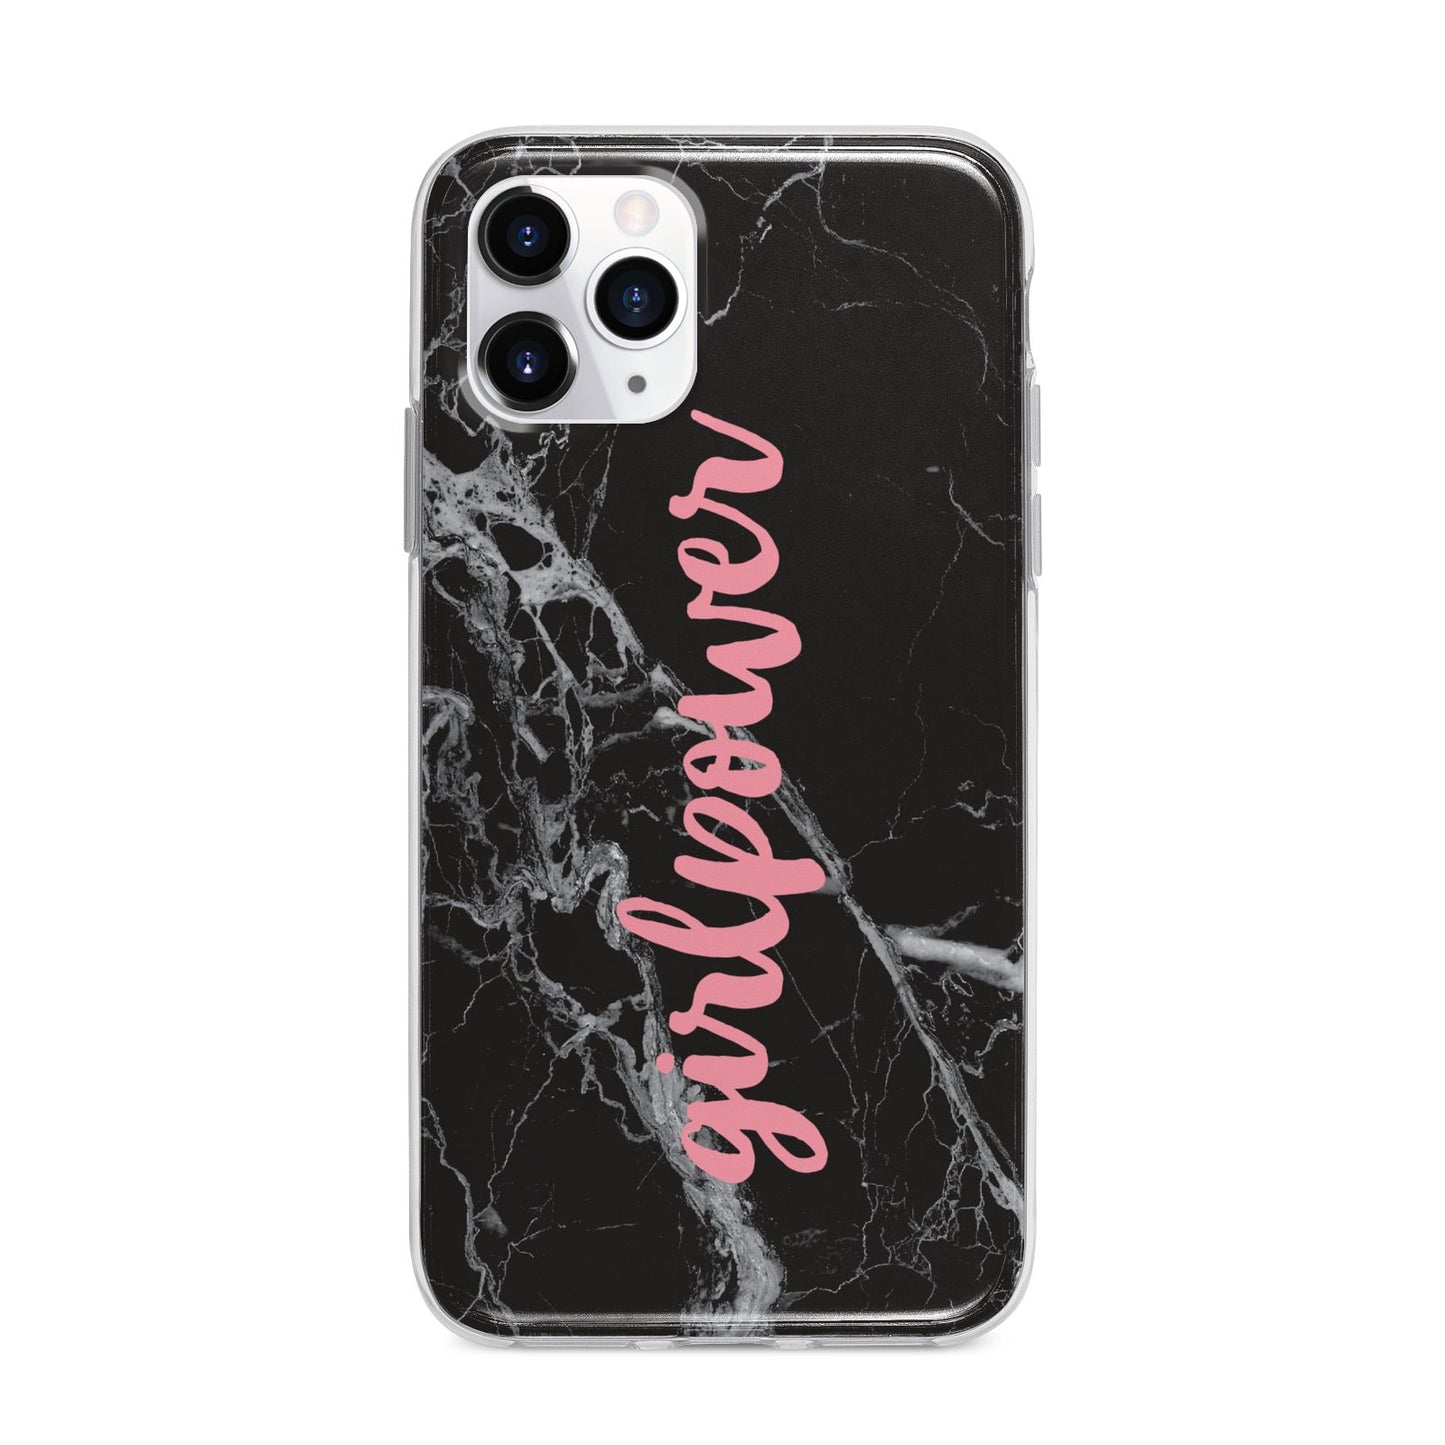 Girlpower Black White Marble Effect Apple iPhone 11 Pro in Silver with Bumper Case